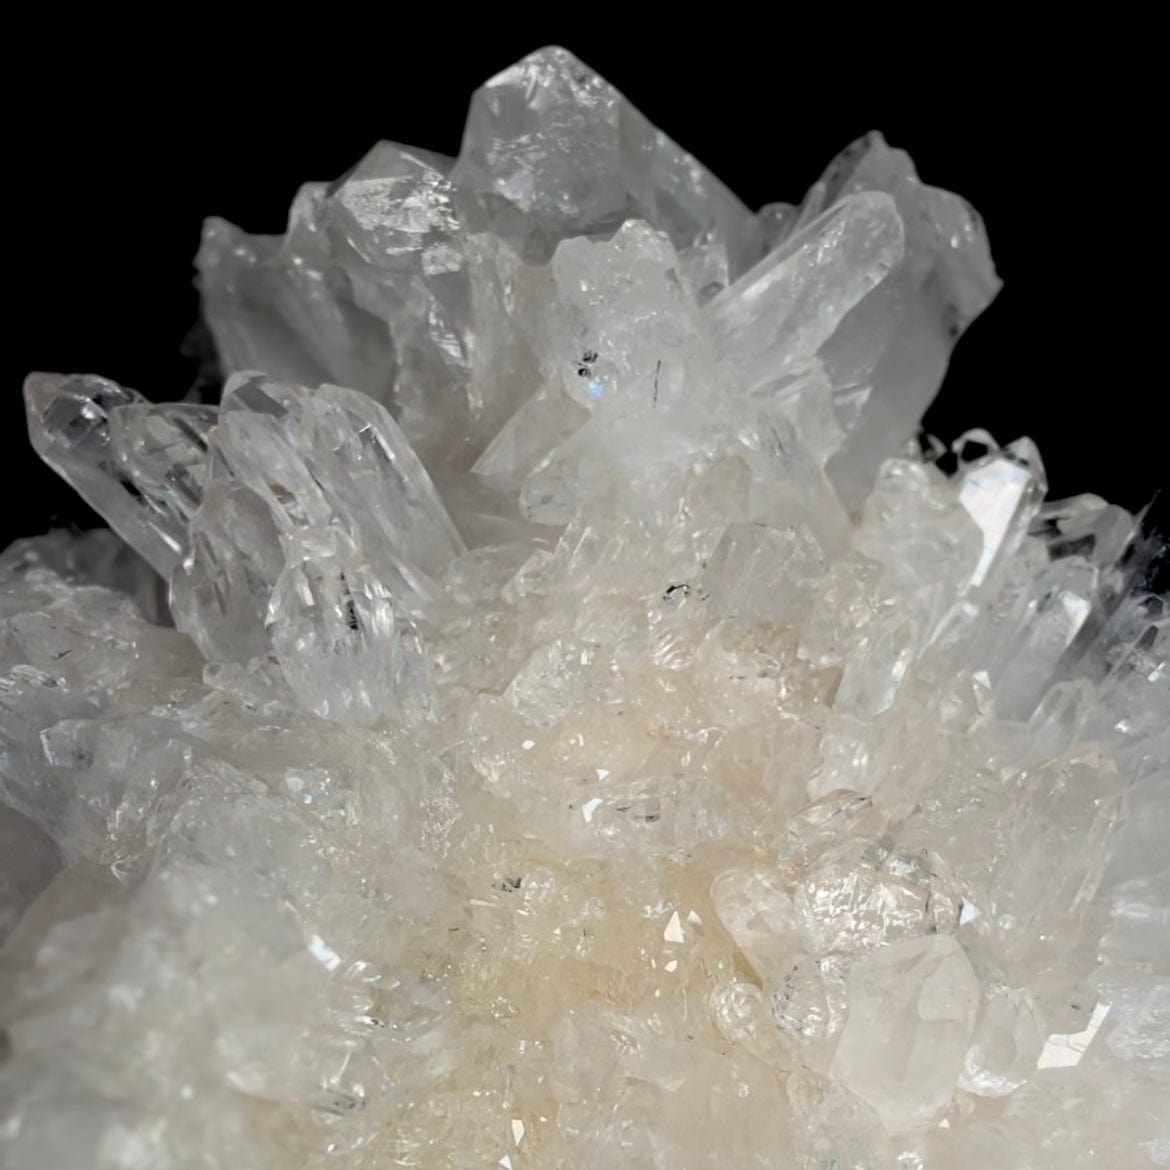 Up close view of quartz points and rainbows on the Rough Crystal Quartz Large Cluster.